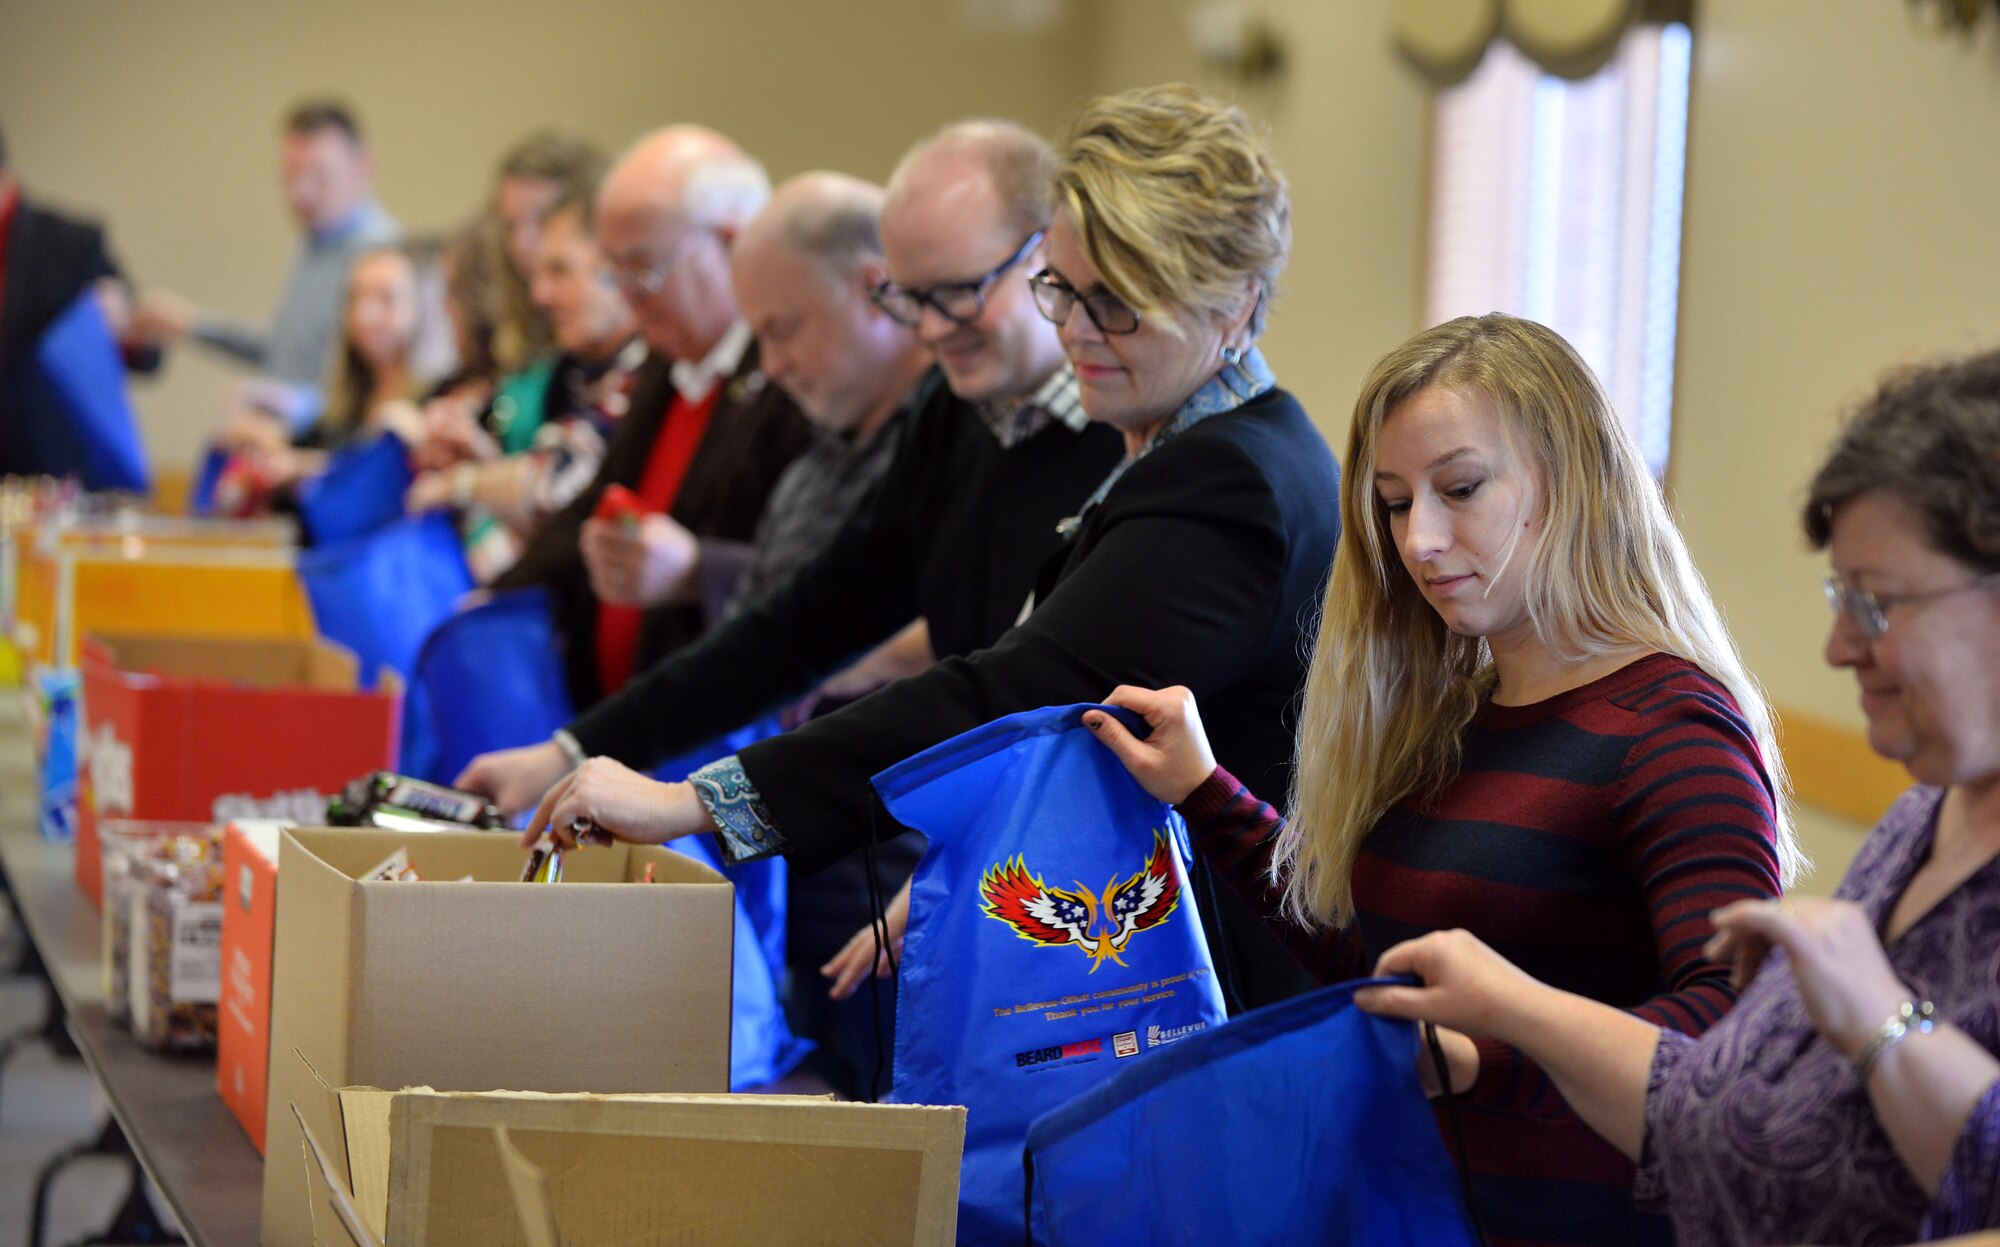 An assembly line of volunteers fill and pass blue bags that will be donated to the Airmen living in the Offutt Air Force Base dormitories this holiday season at the Bellevue Fire House on Dec. 17, Bellevue Neb.  Offutt Air Force Base has long standing ties with the local community.  (U.S. Air Force photo by Josh Plueger)